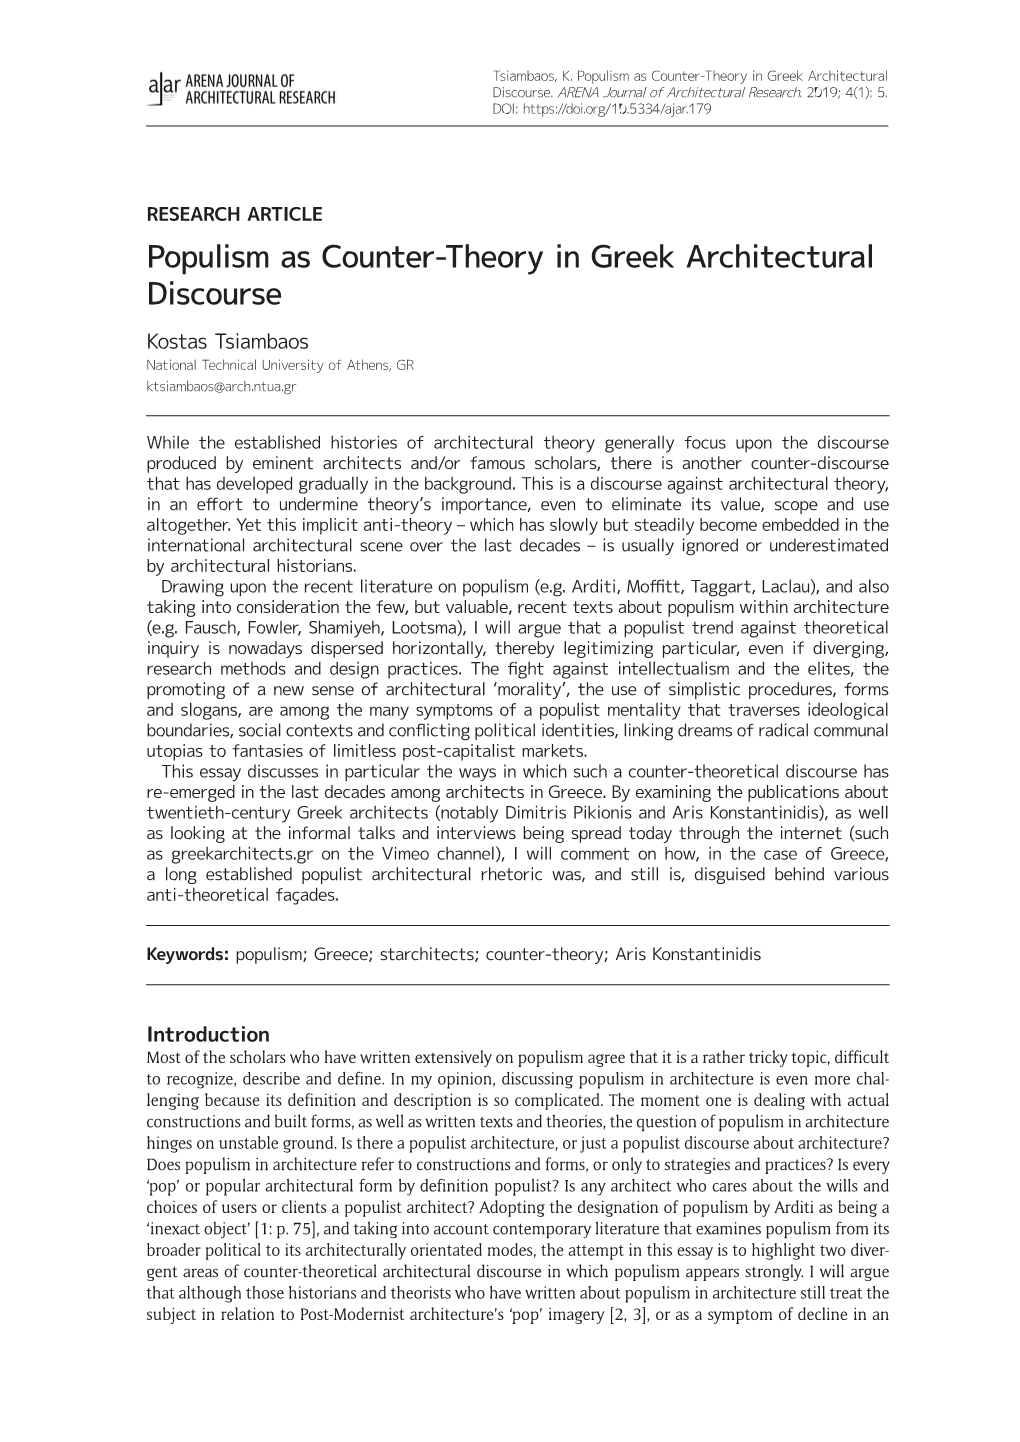 Populism As Counter-Theory in Greek Architectural Discourse